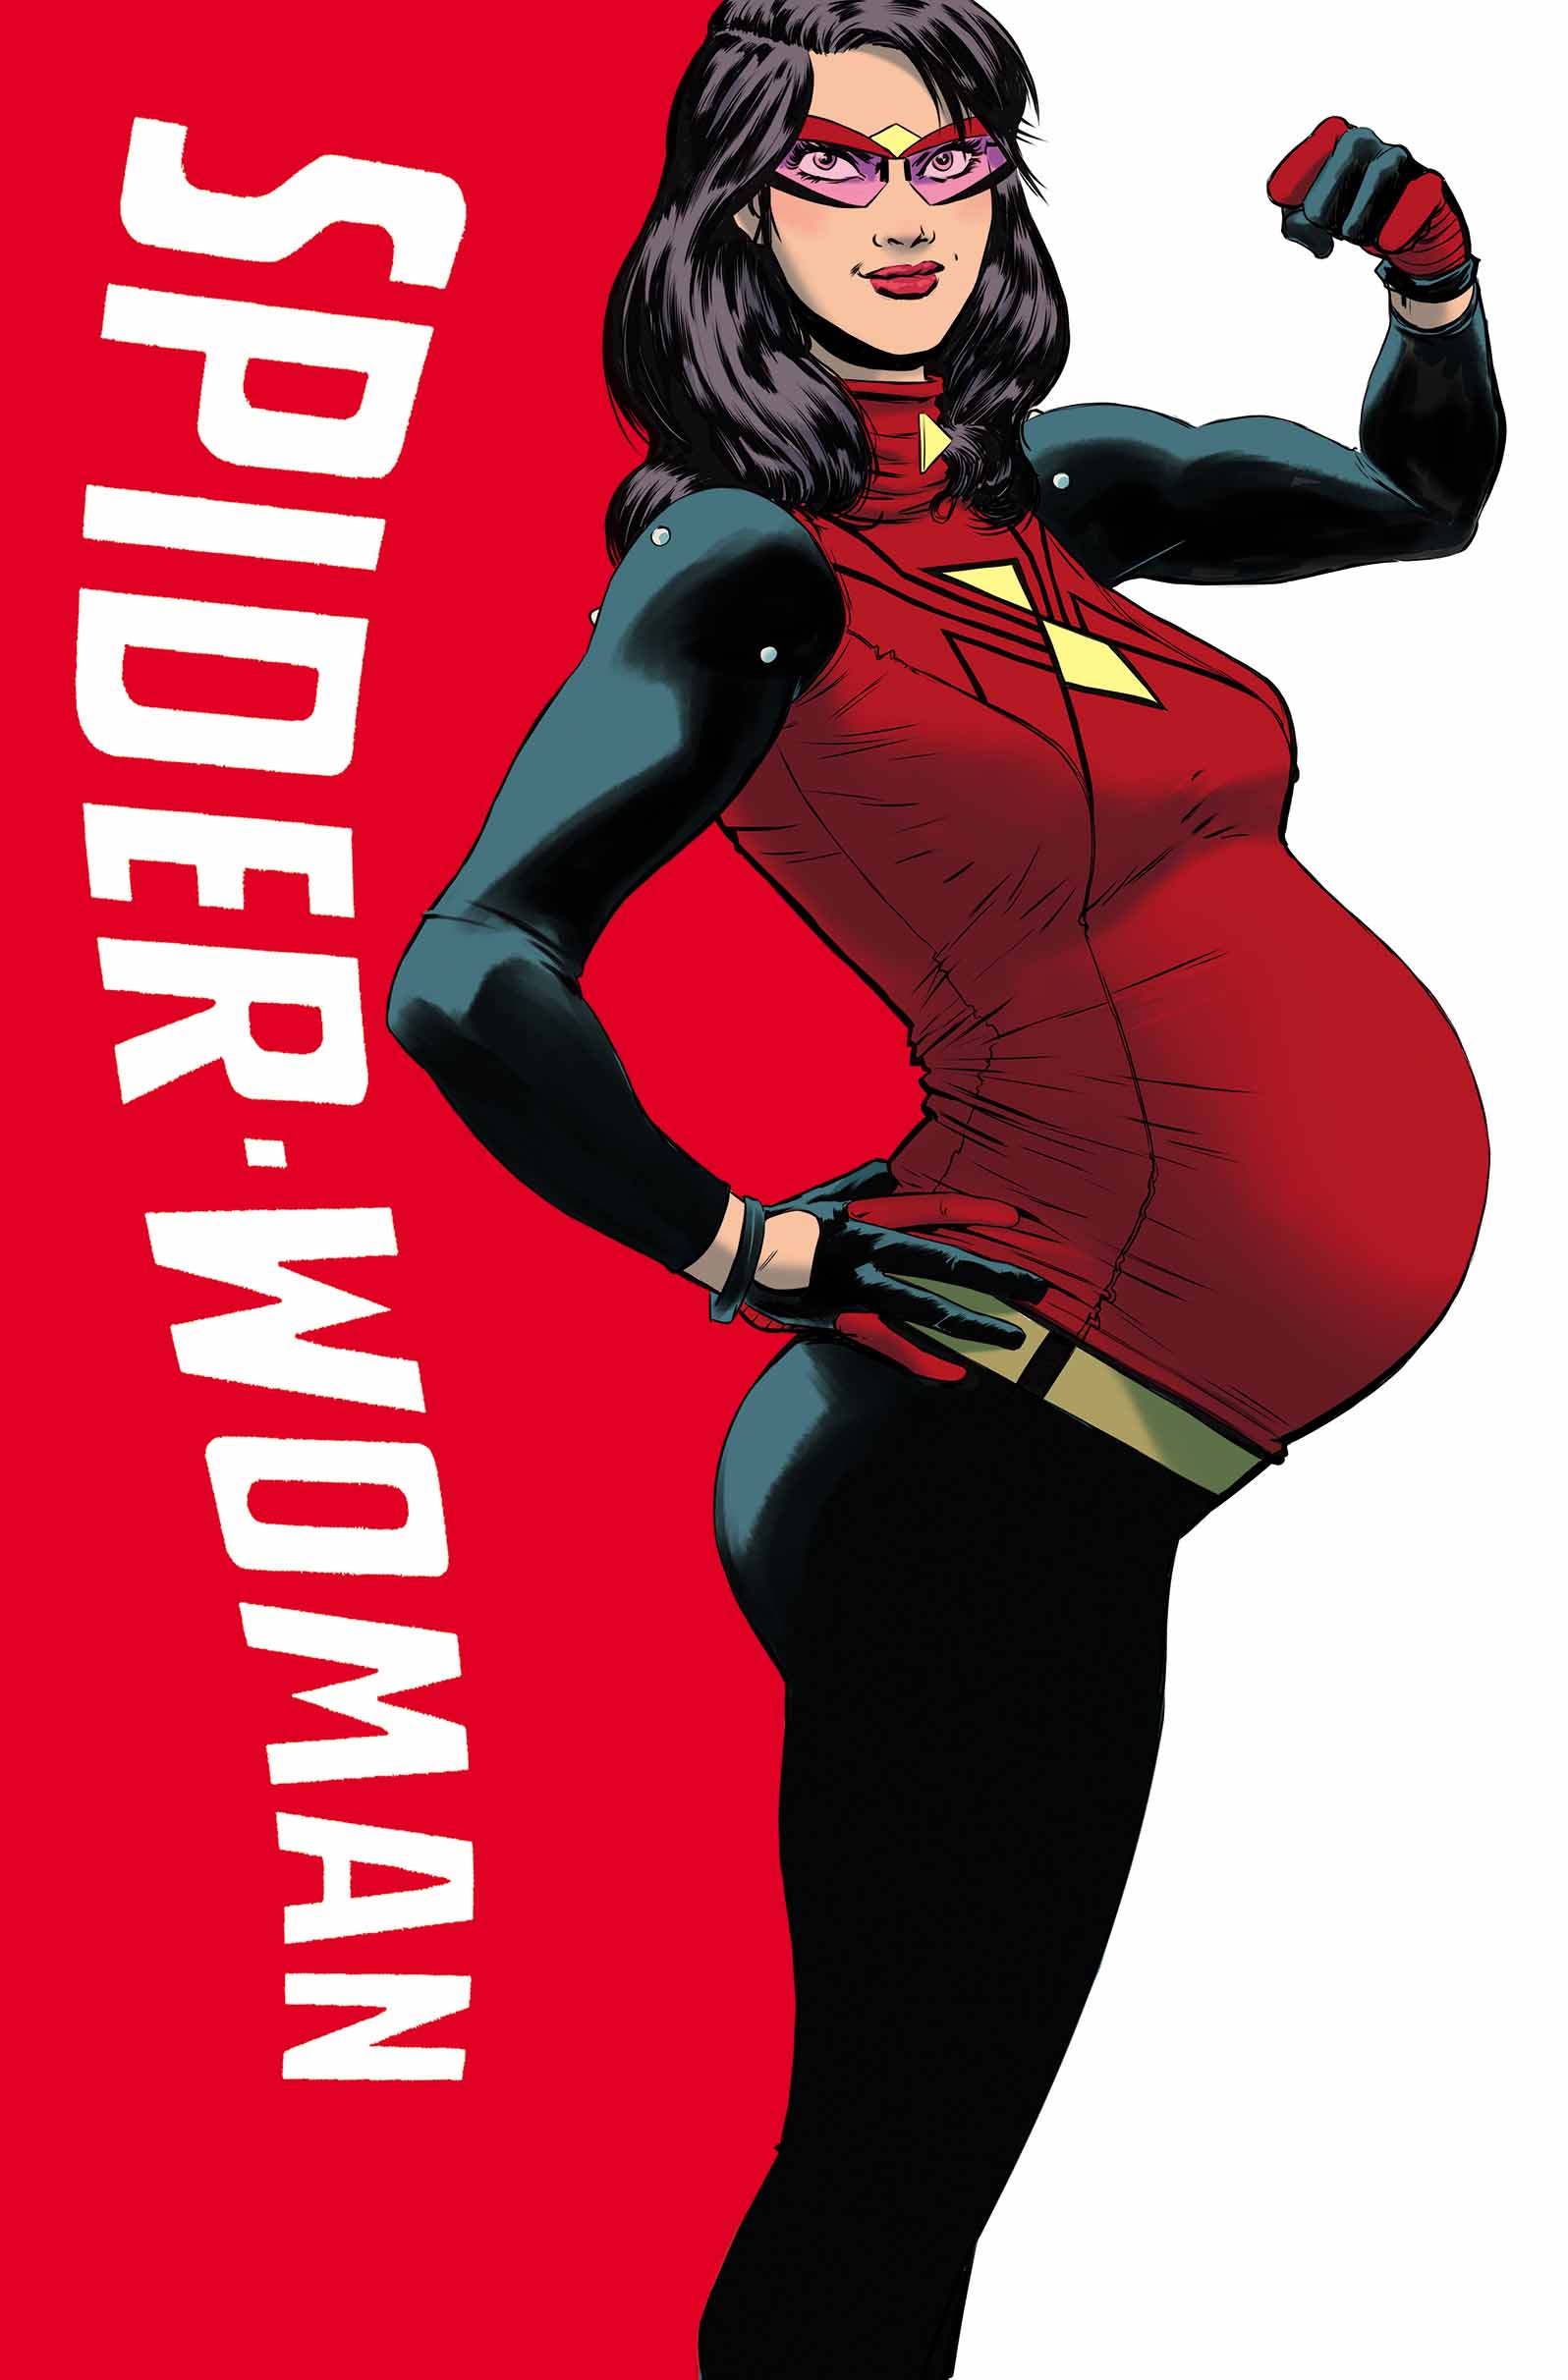 Baby on Board – Your First Look at Spider-Woman #1!